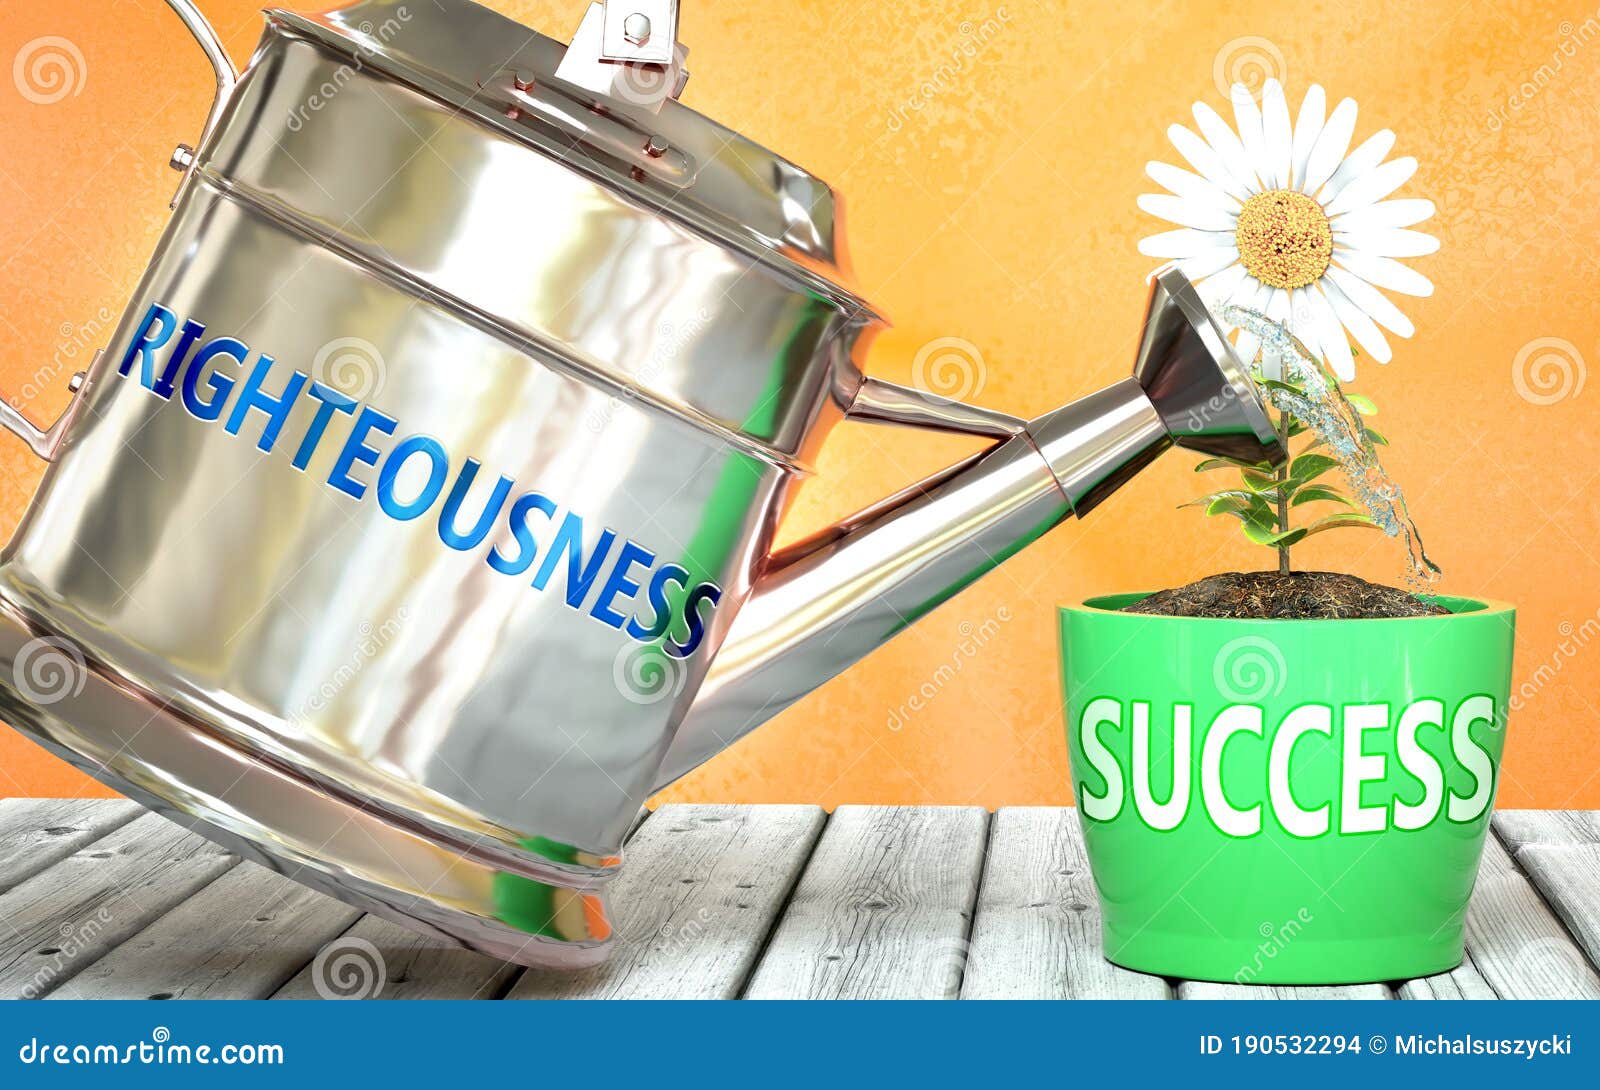 righteousness helps achieve success - pictured as word righteousness on a watering can to show that it makes success to grow and